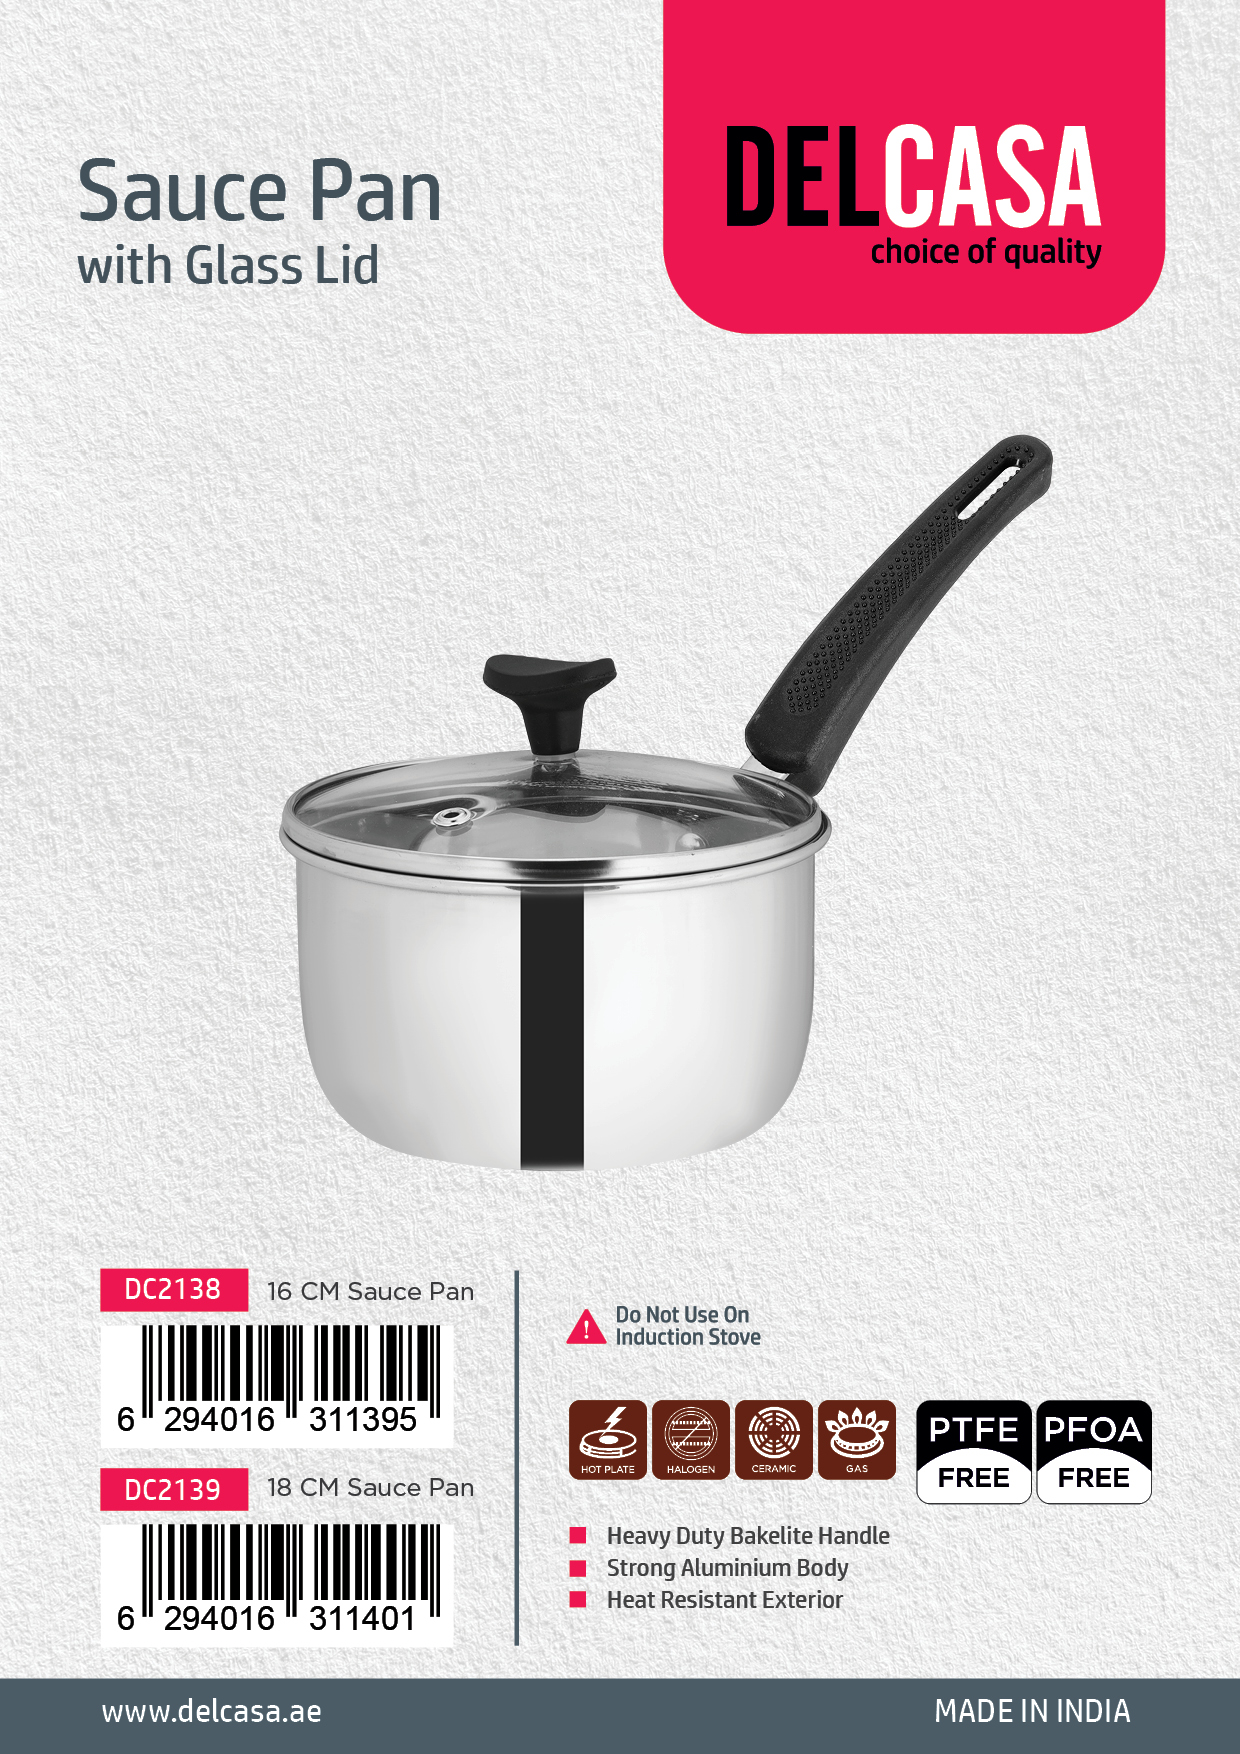 Delcasa Sauce Pan with Glass Lid - 16CM